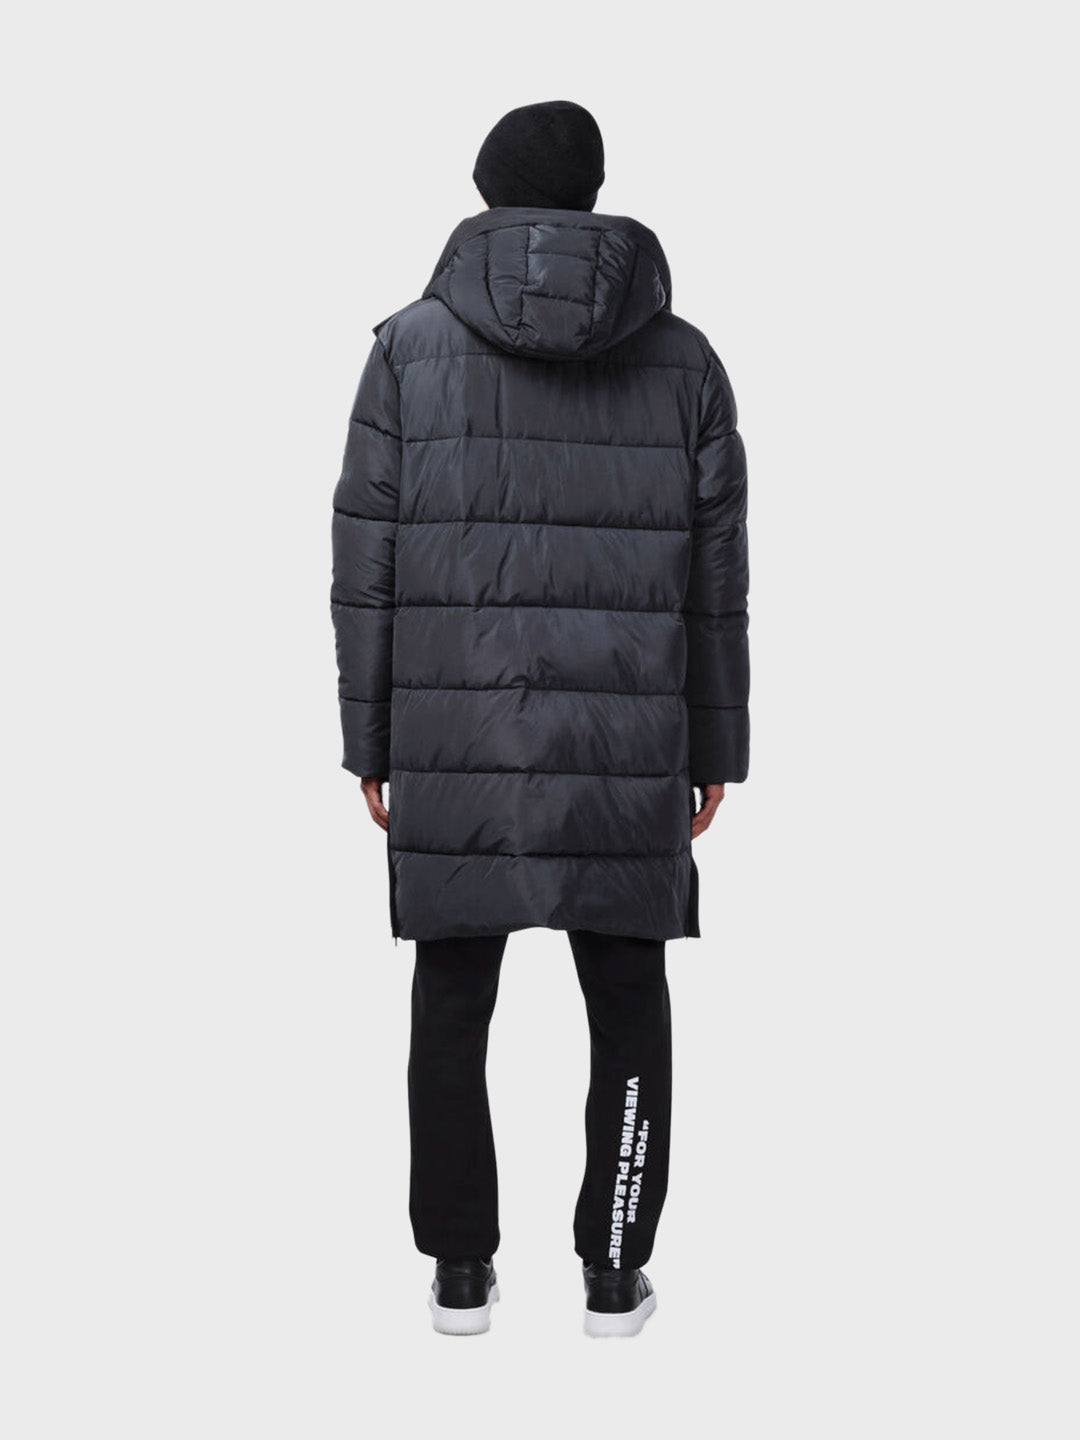 off the pitch puffer jacket